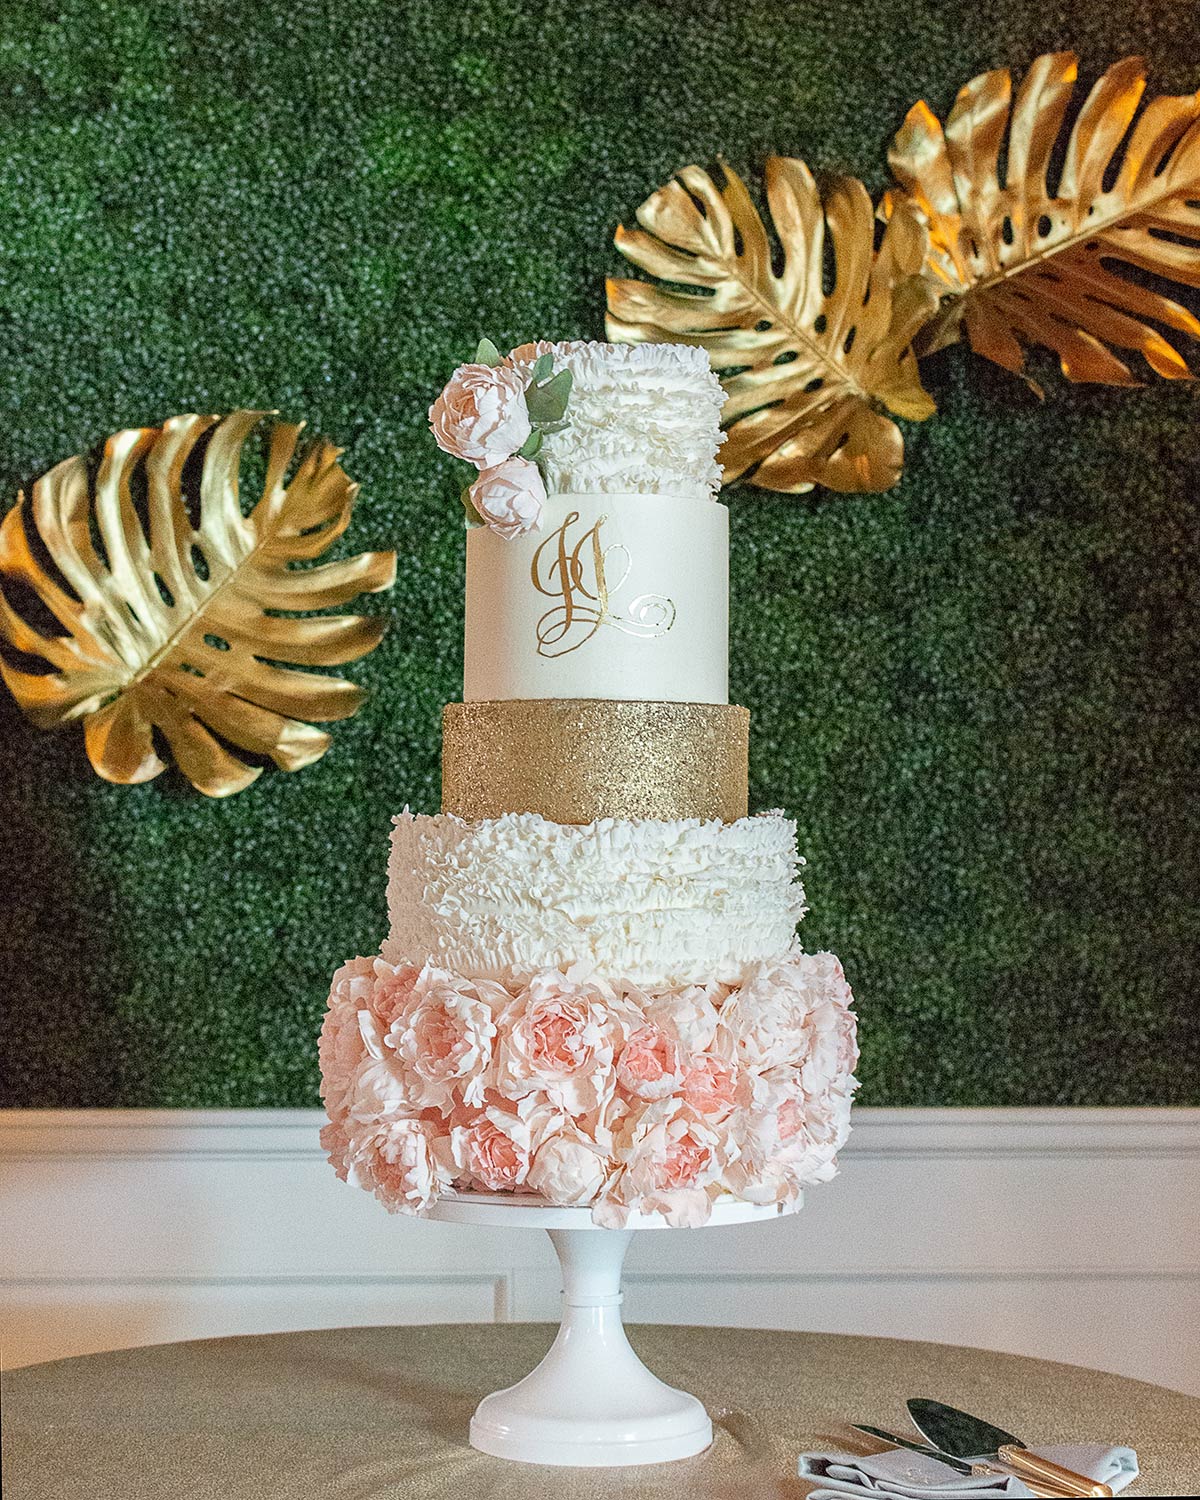 Edible Ruffles and Sugar Flower with Gold Accents Cake